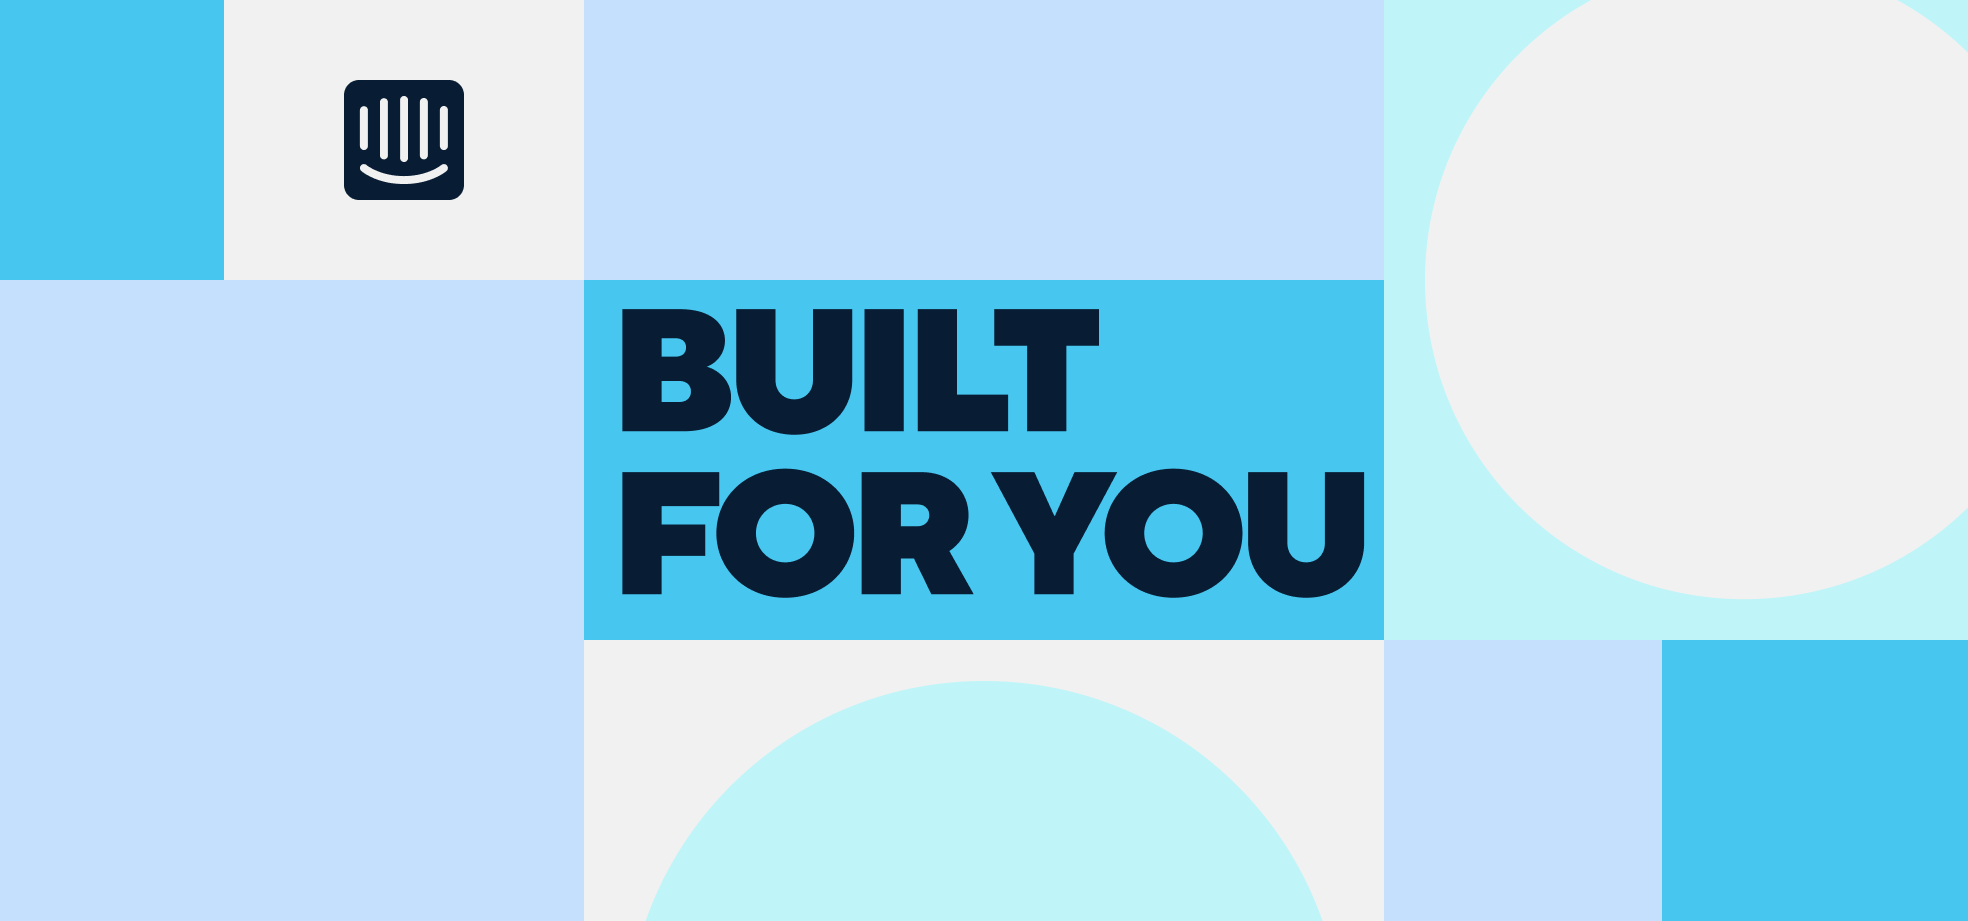 Built for you: Tooltips, new support languages, personalized posts, and much more